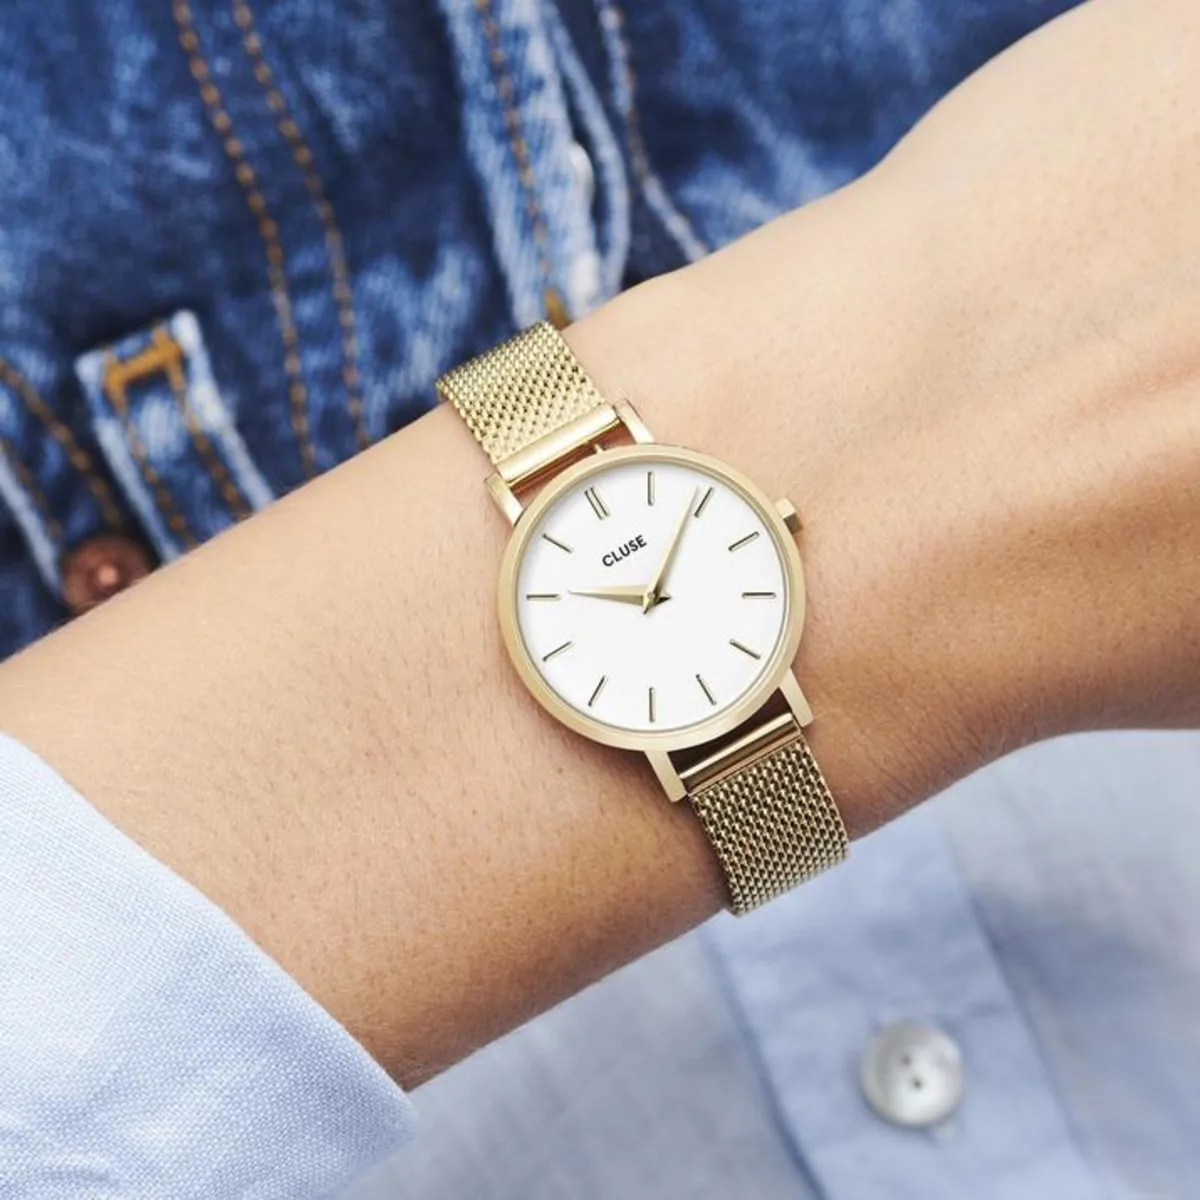 Small size, big dreams. With its refined 28 mm case, our Boho Chic Petite collection is your perfect companion if you prefer a smaller, understated timepiece. Featuring a matte white dial and gold coloured case & strap, you'll always be on-trend with this classic colour combination. A watch built to last thanks to its stainless steel case and mesh strap.